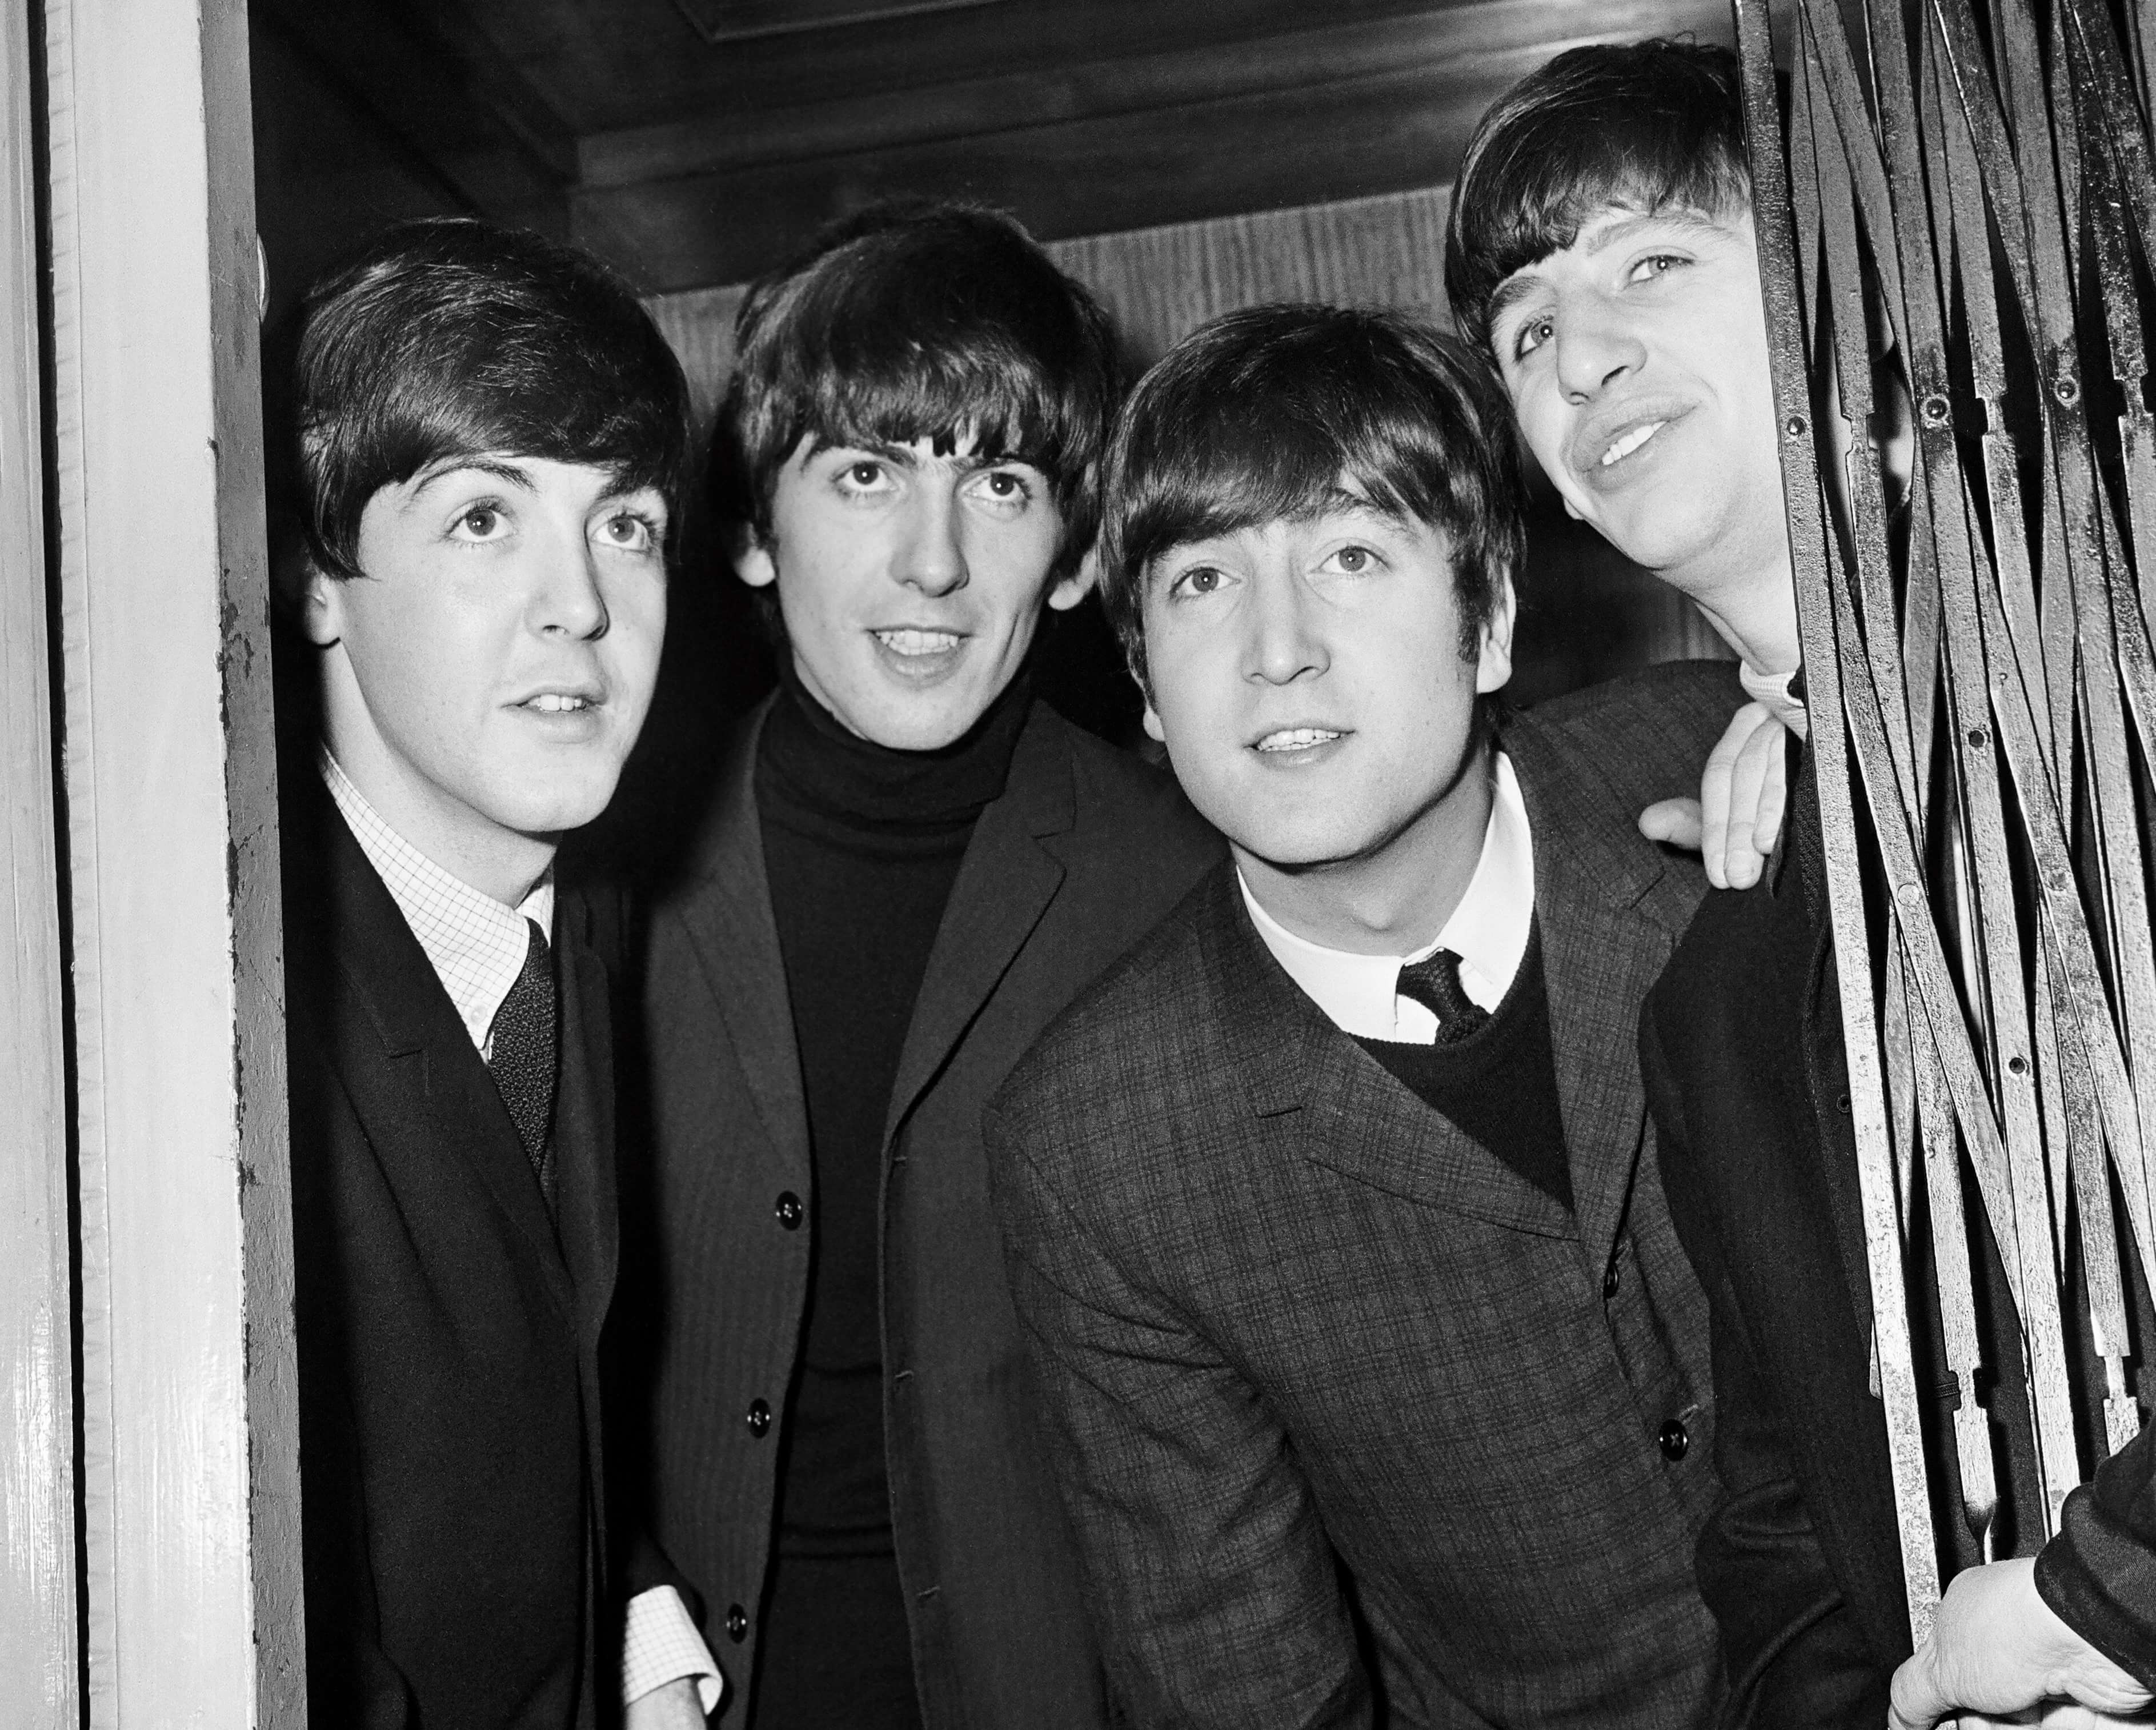 The Beatles' 'Taxman': A Timeless Classic or a Dated Relic?